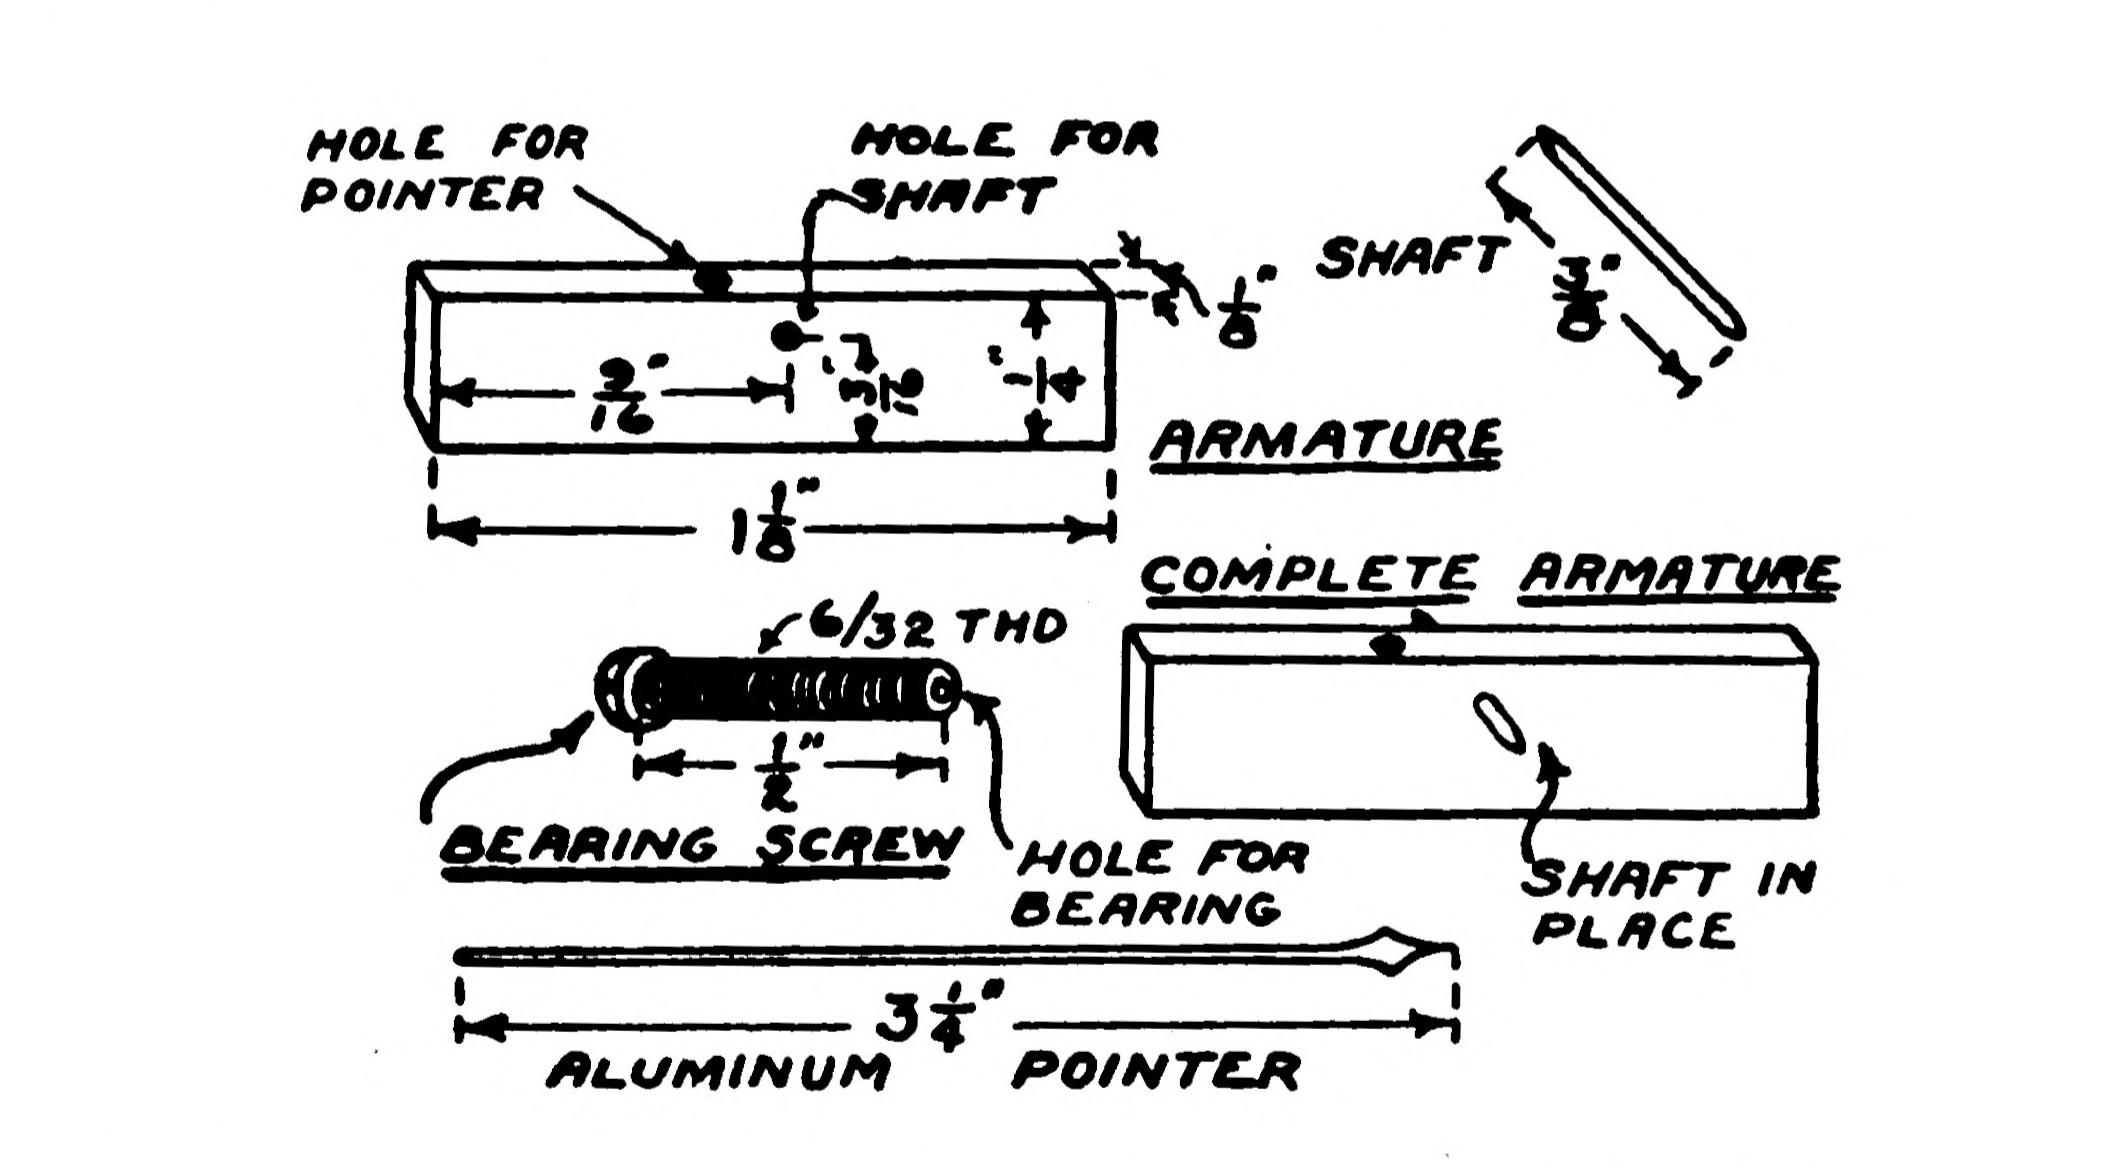 FIG. 69.—Details of the Armature, Bearings and Pointer.